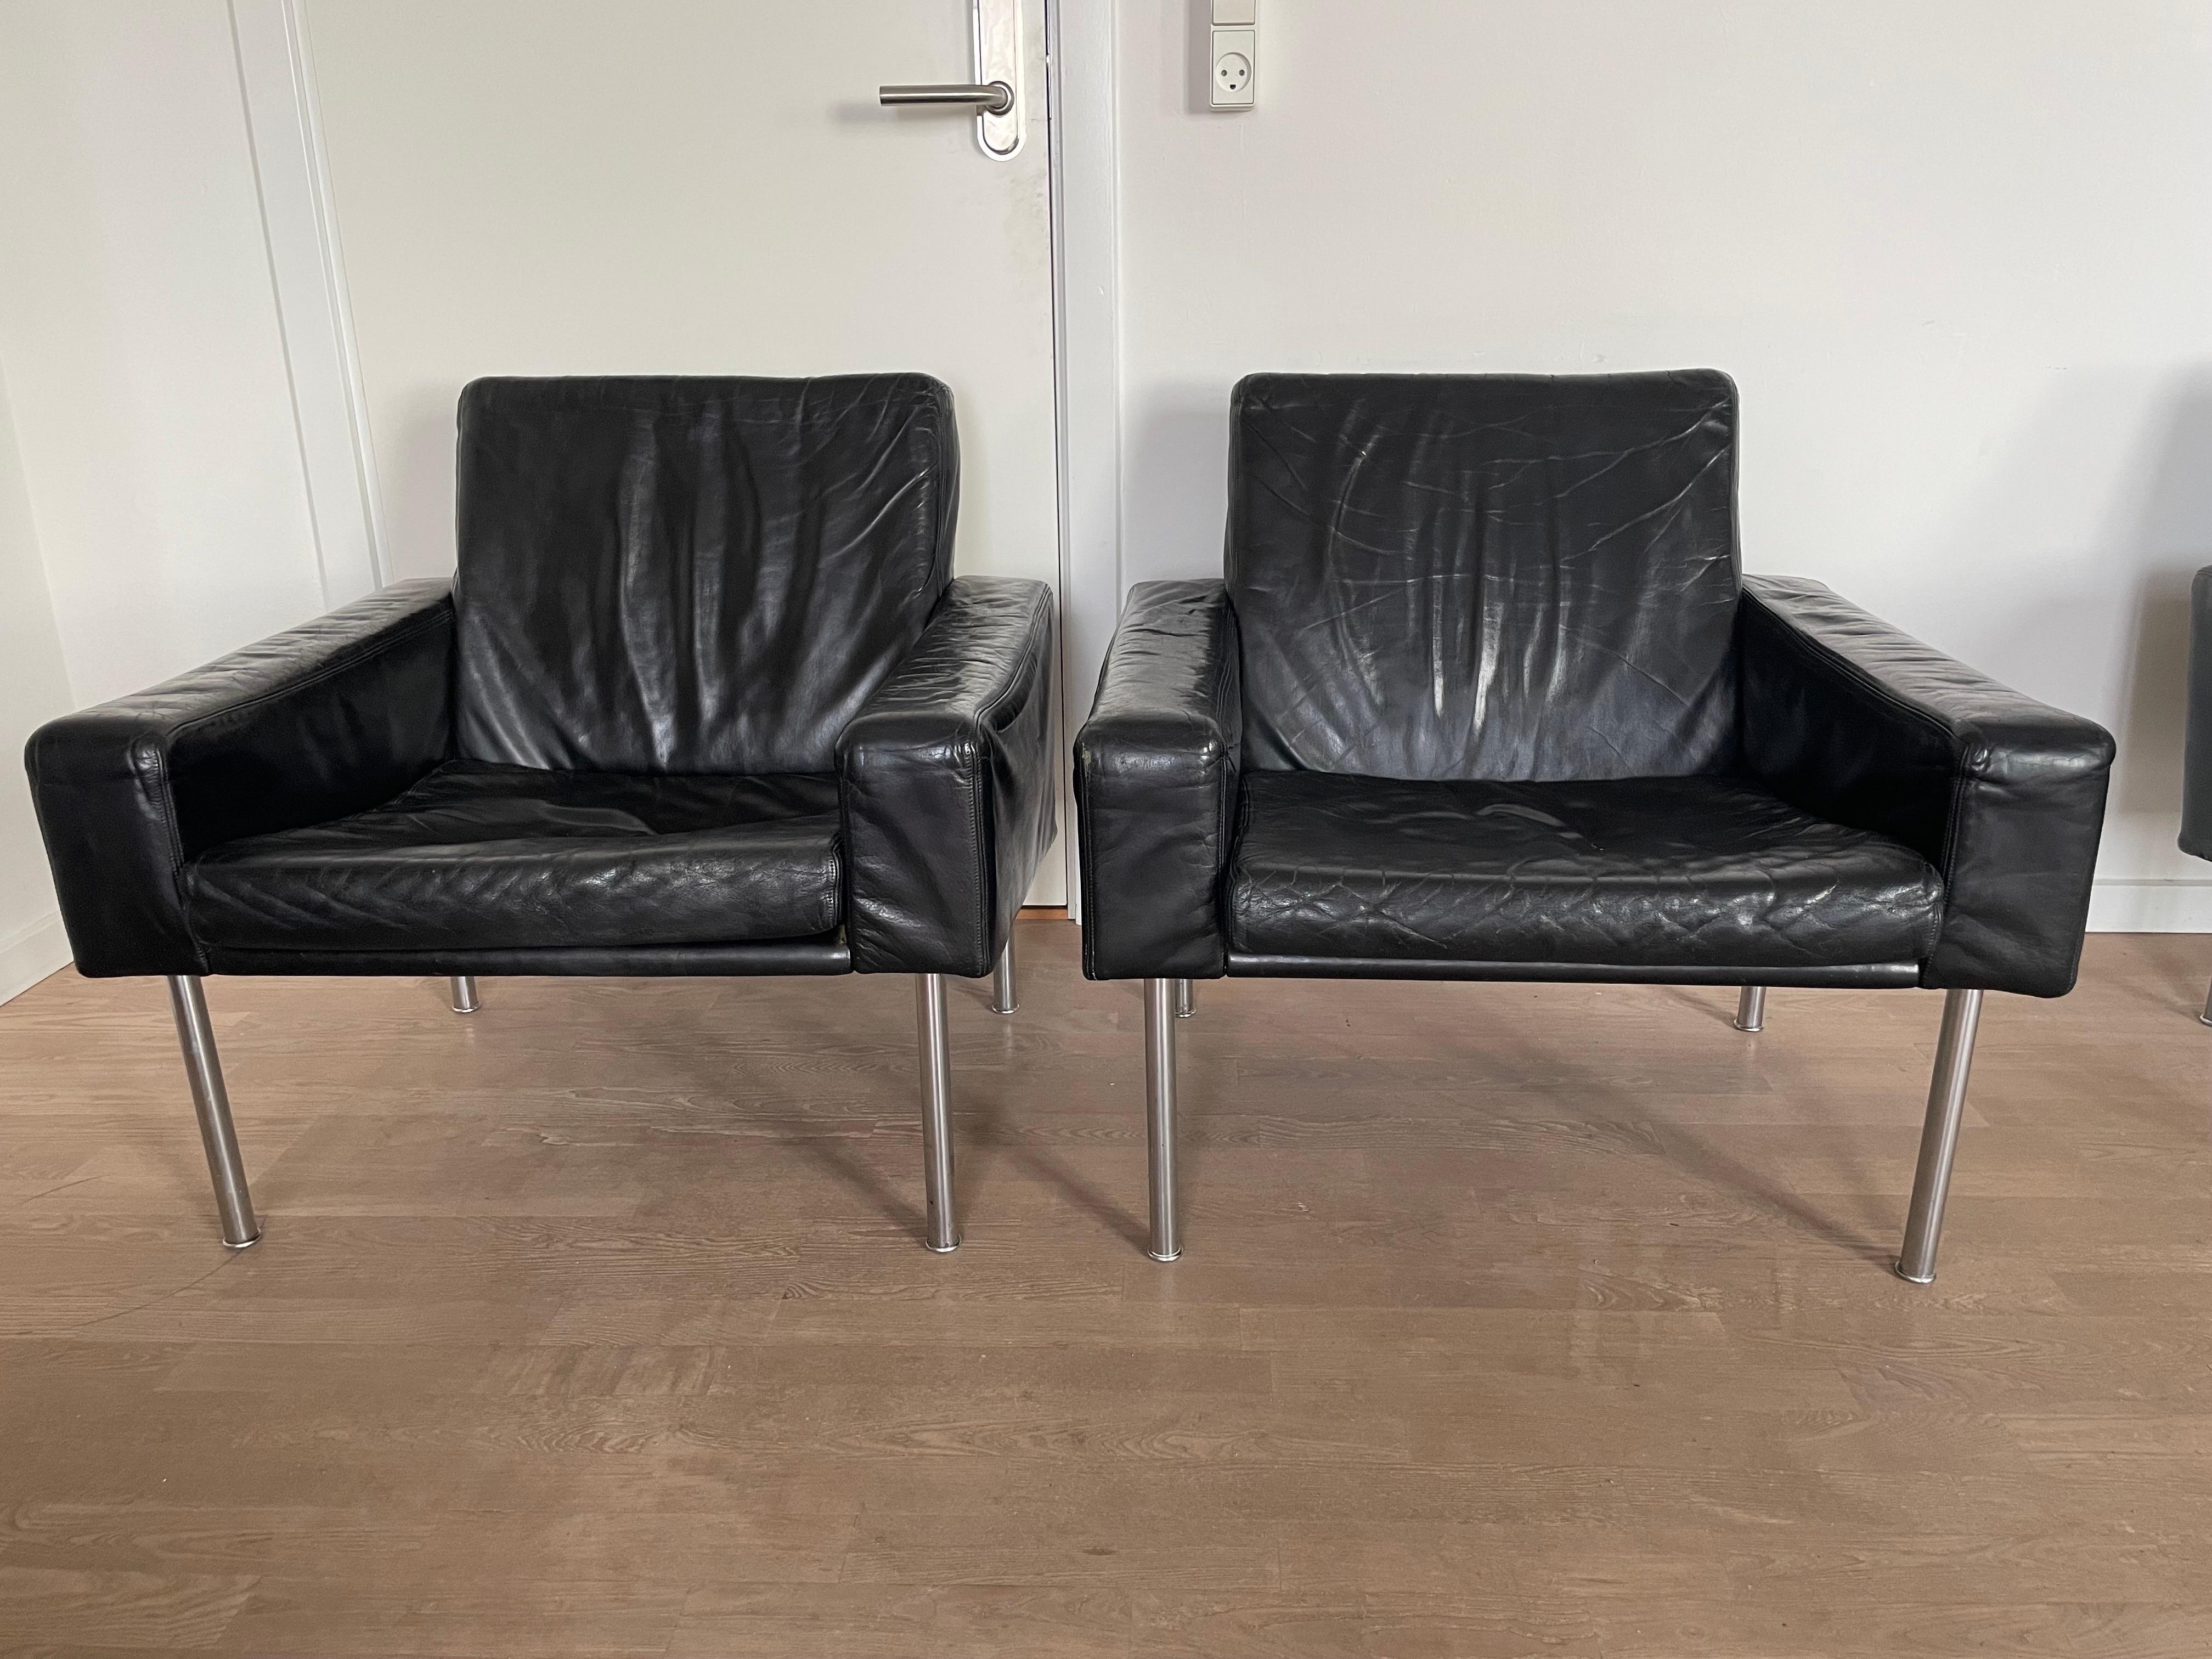 Danish Hans Wegner Three-Seater and Set of Chairs for the 